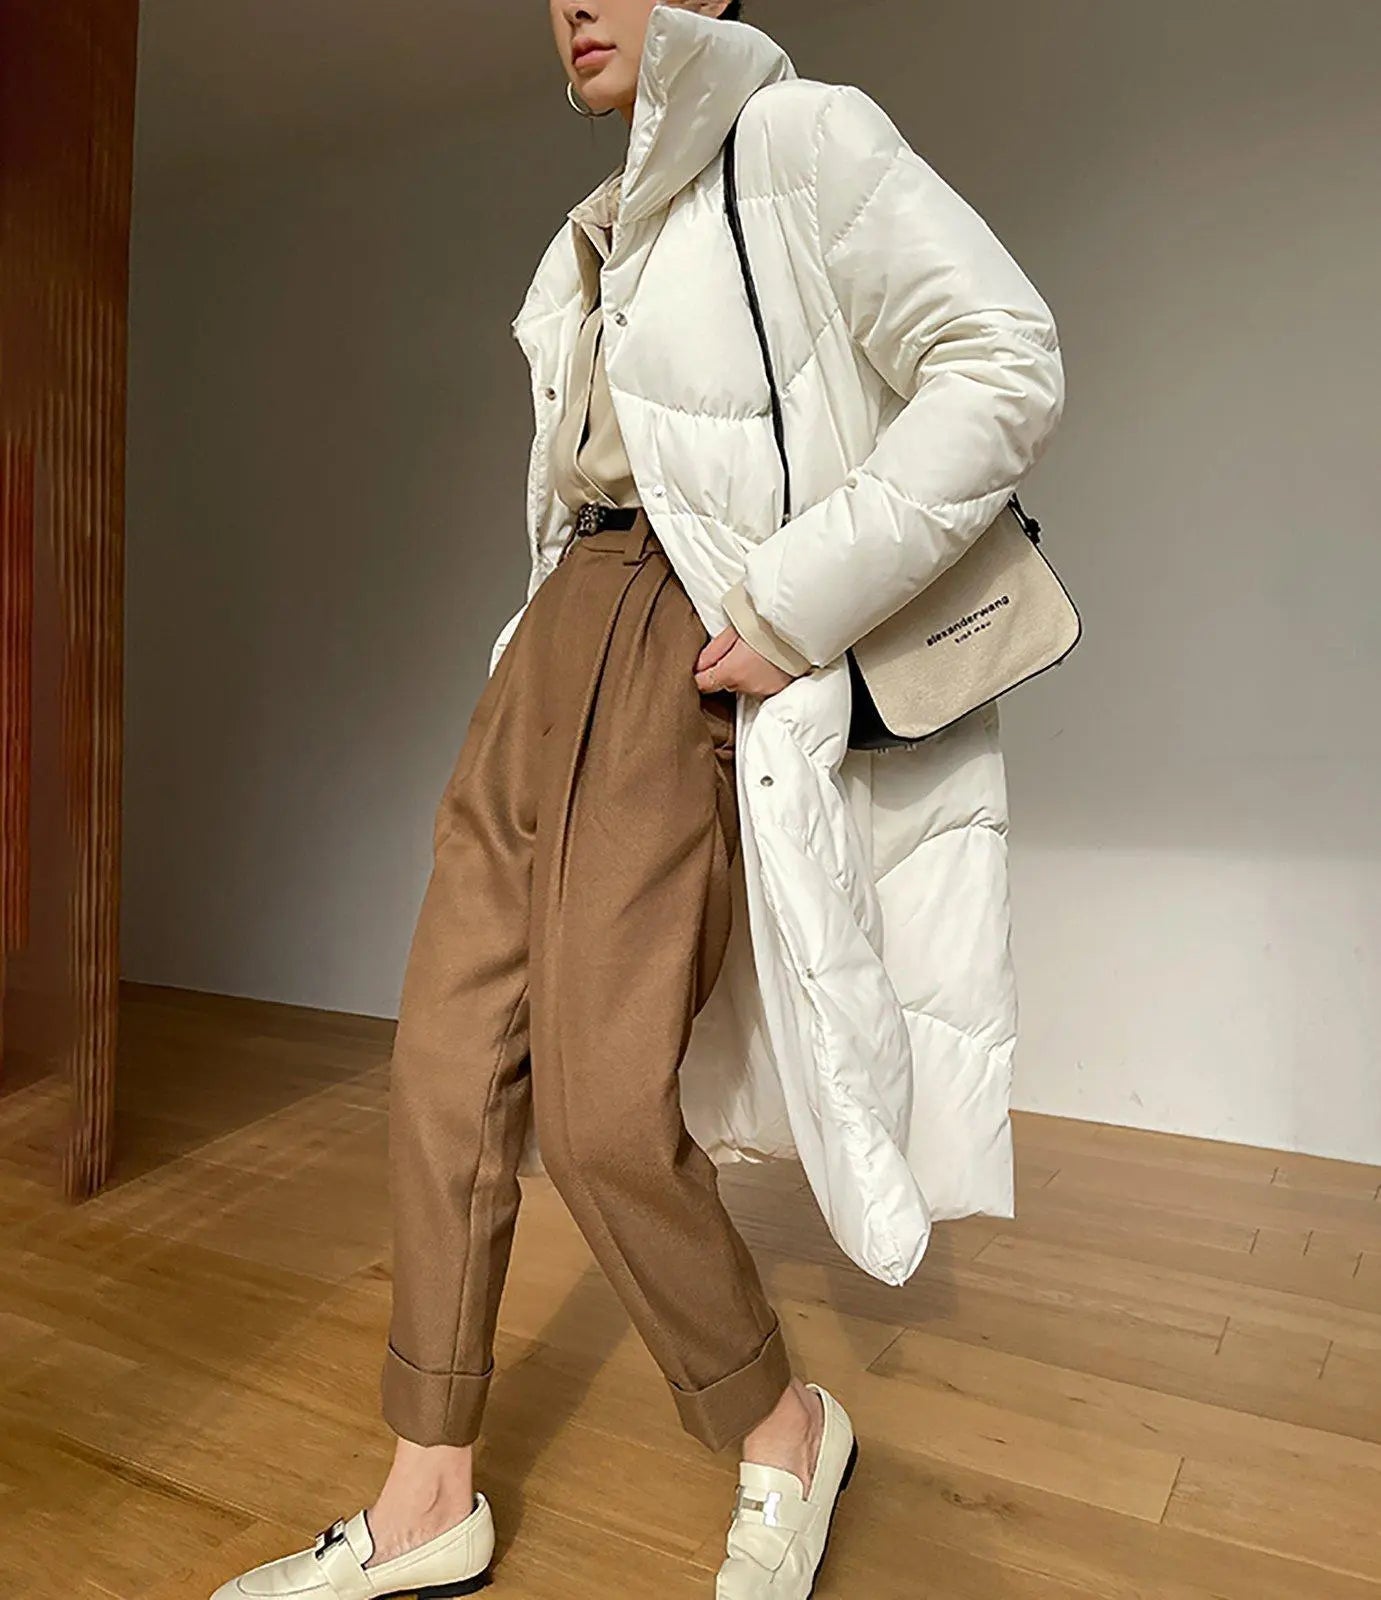 Women White Long Down Coat,White long Down Jacket,Warm Puffy Coat,Quilted Down Puffer Coat,Warm Winter Coat,Down Coat Women,Long Down Puffer Vivian Seven